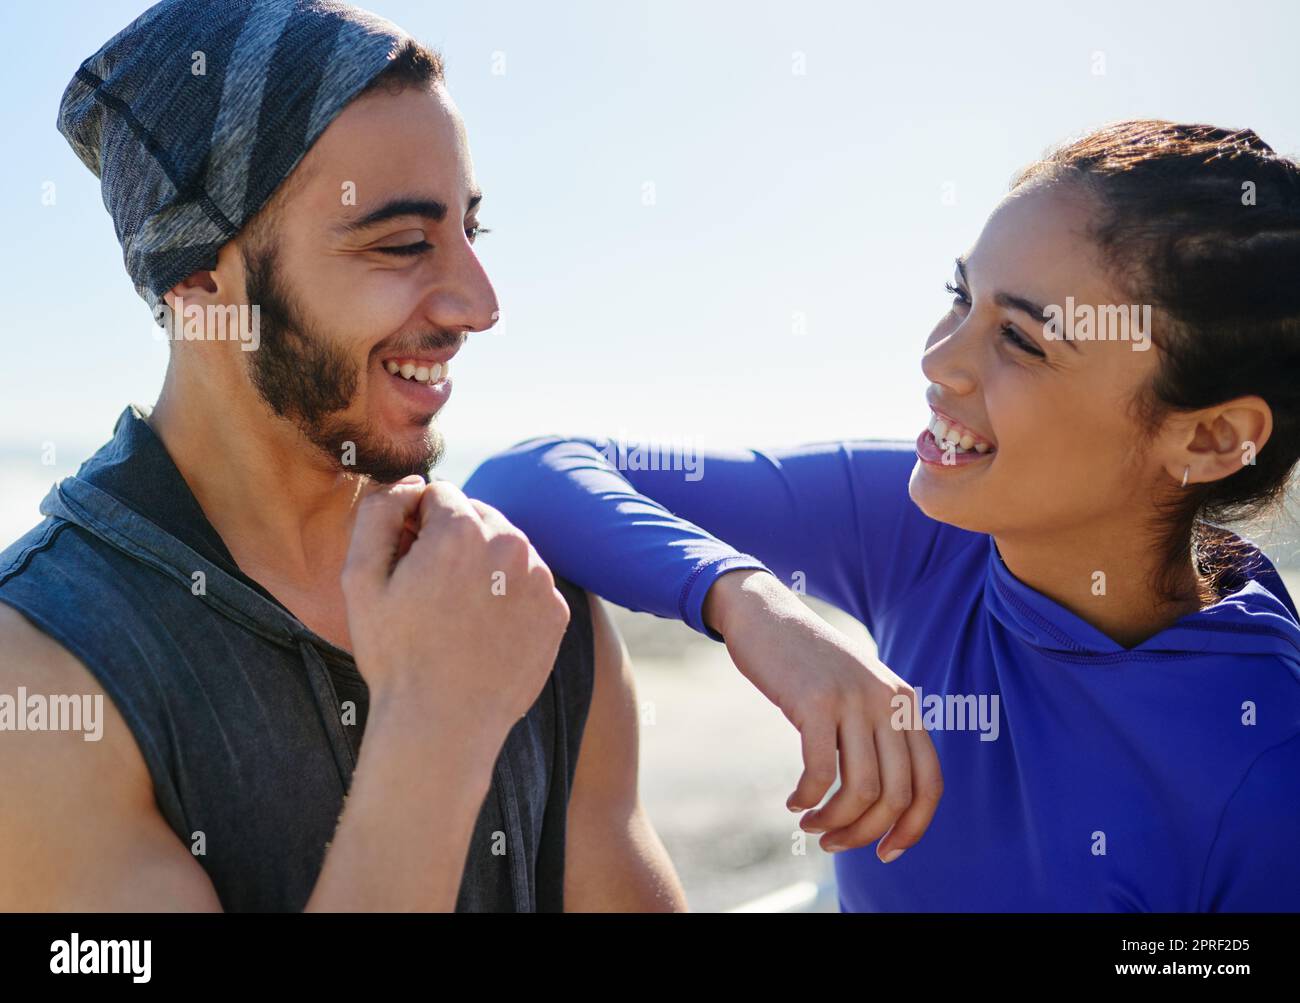 Are you ready for today. two young cheerful friends hanging out together before a fitness exercise outside during the day. Stock Photo